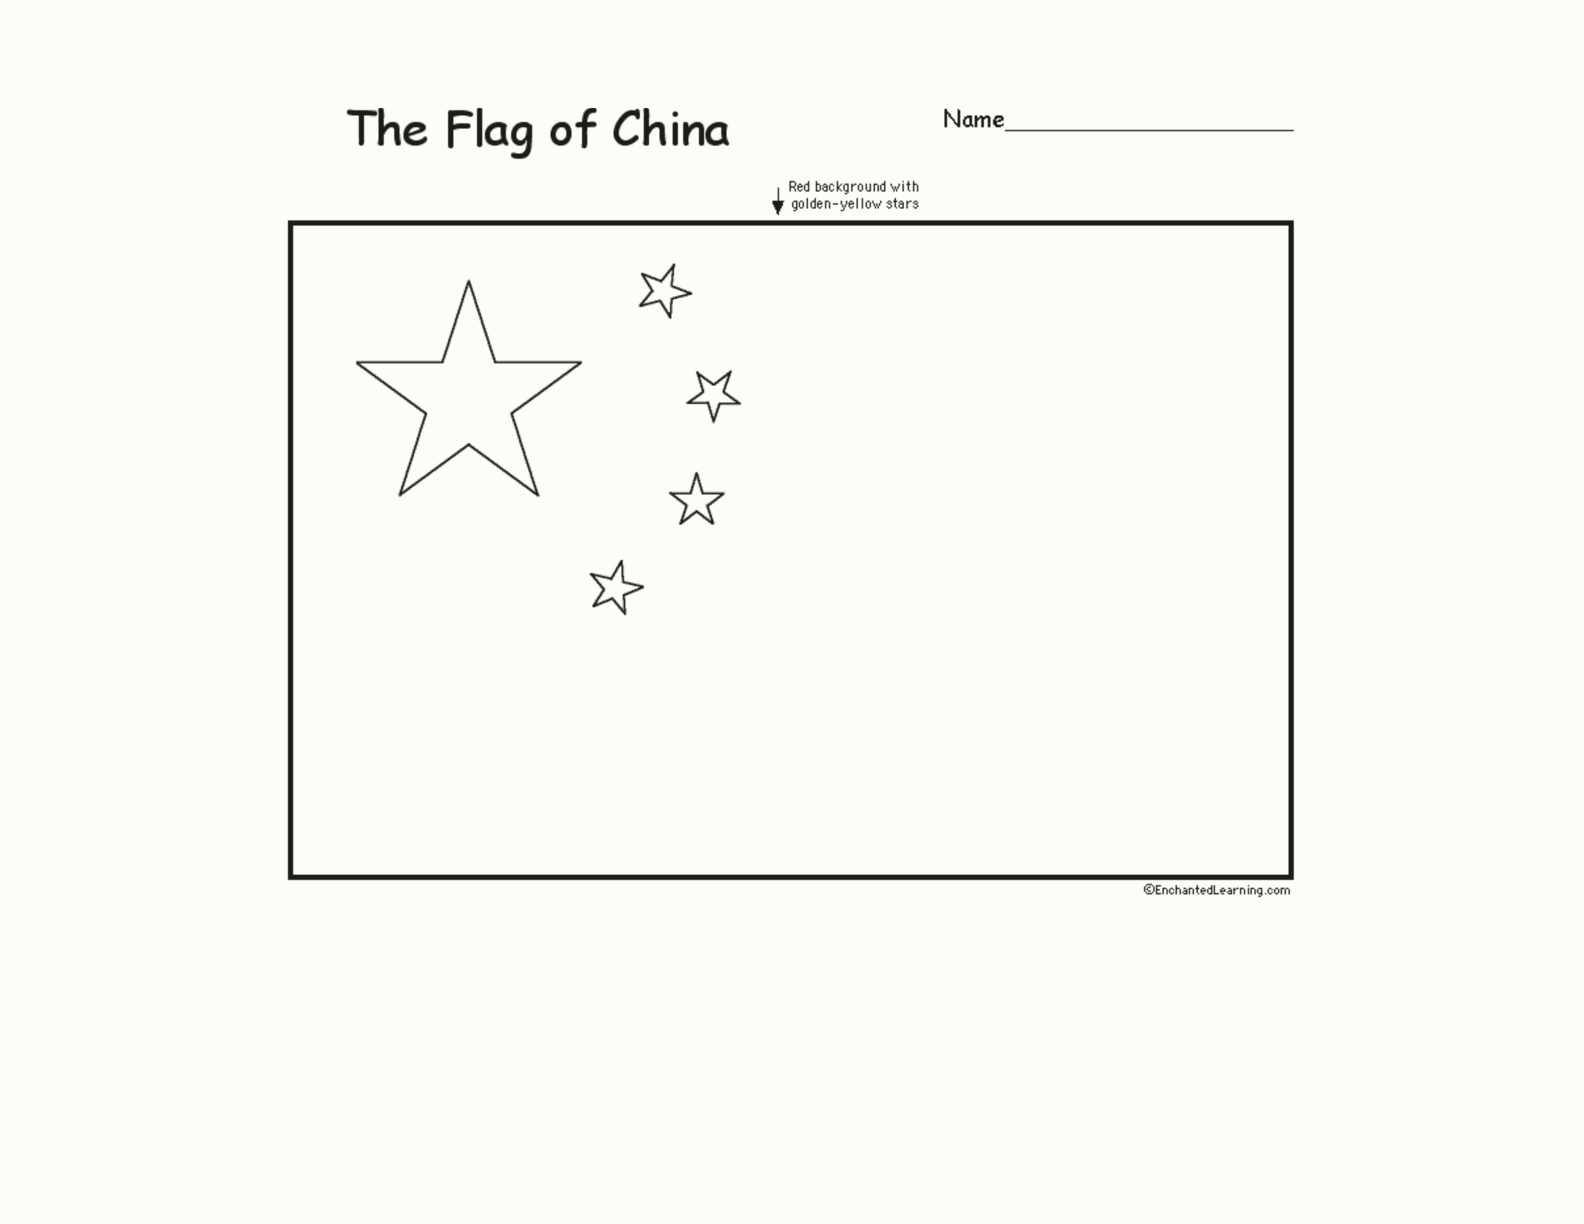 Flag of China interactive printout page 1